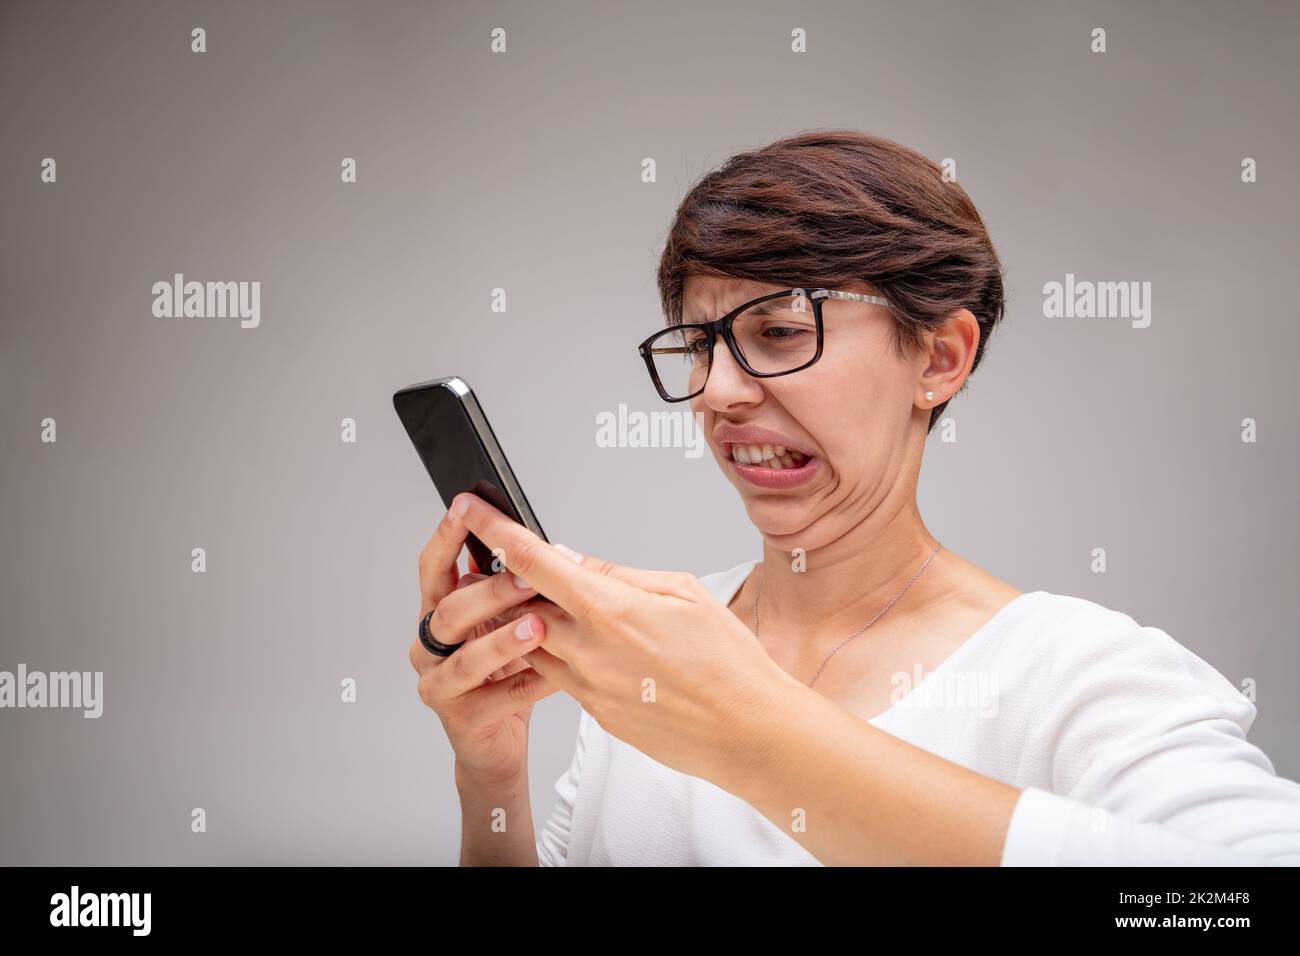 Woman reacting in revulsion to her mobile phone Stock Photo